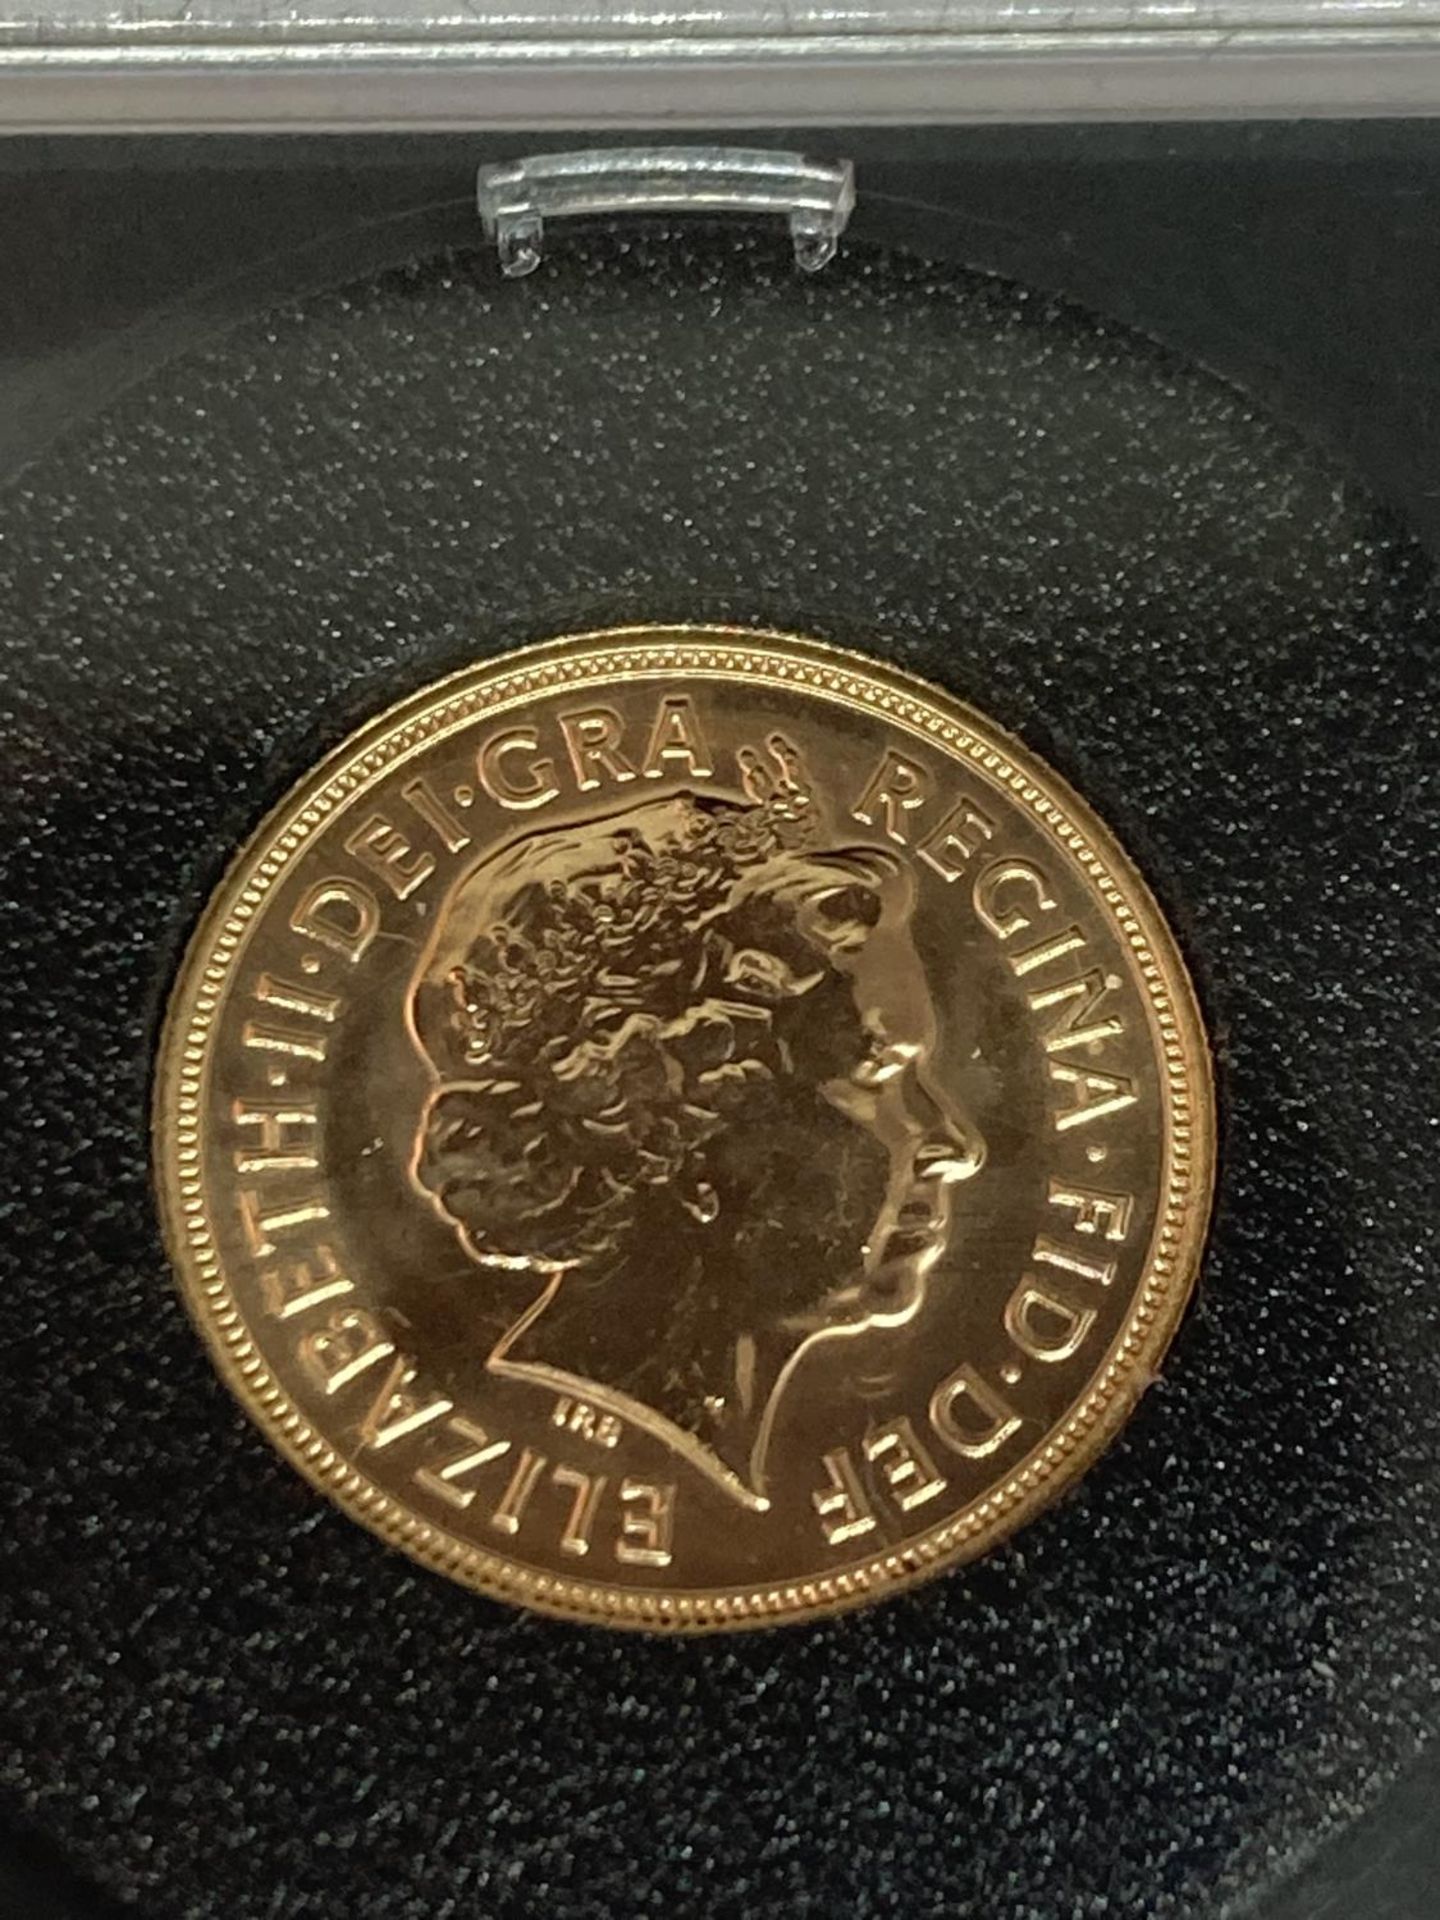 A 2013 GOLD SOVEREIGN WITH CERTIFICATE OF AUTHENTICITY - Image 3 of 3